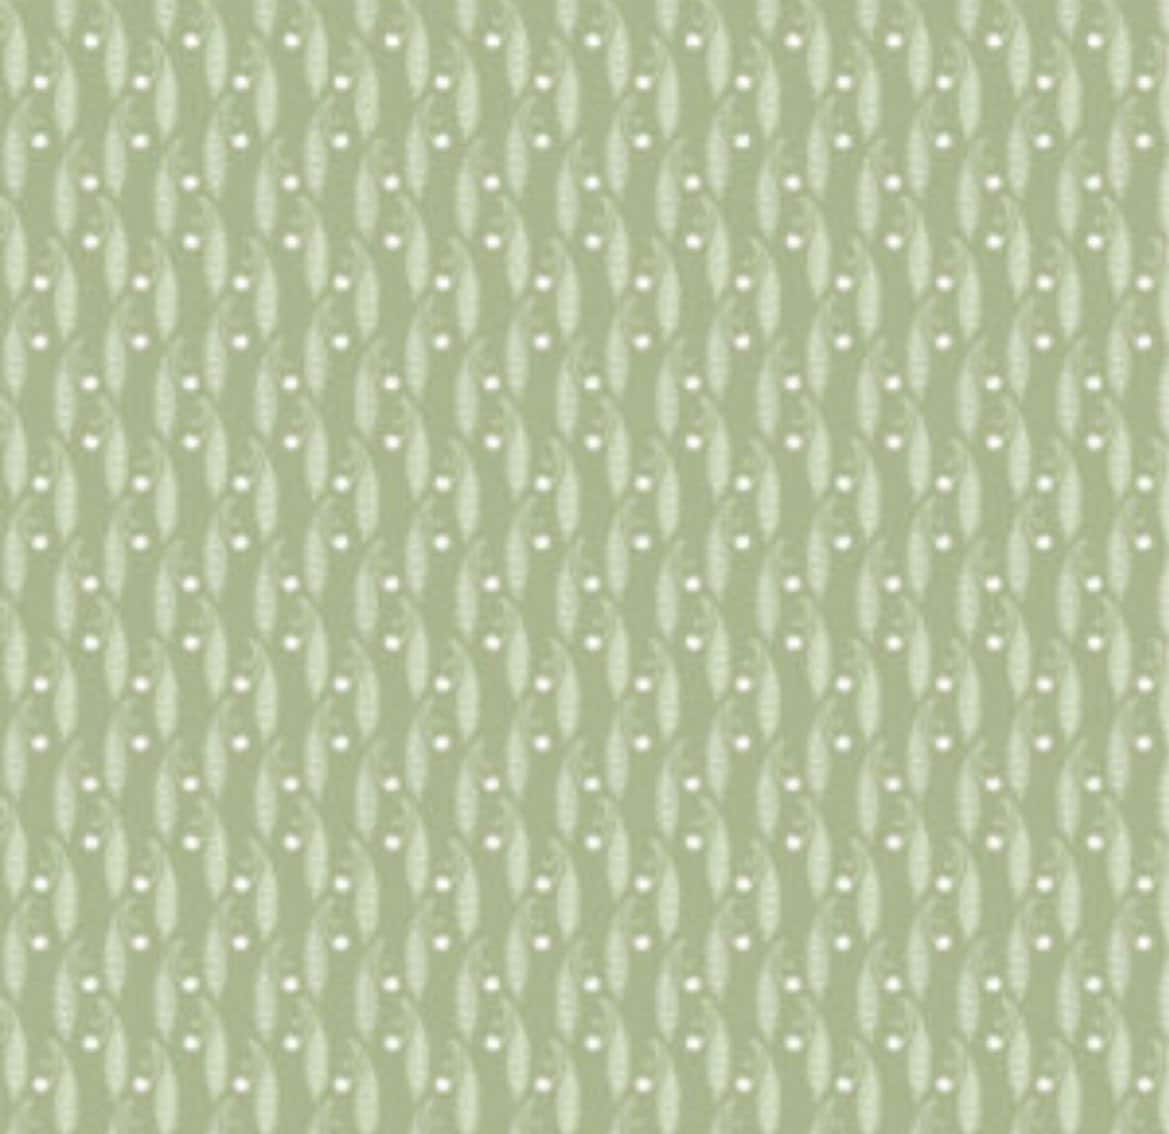 Sweet Pea Green - Songbird Serenade Collection by Sheri McCulley - Poppie Cotton - 100% Cotton